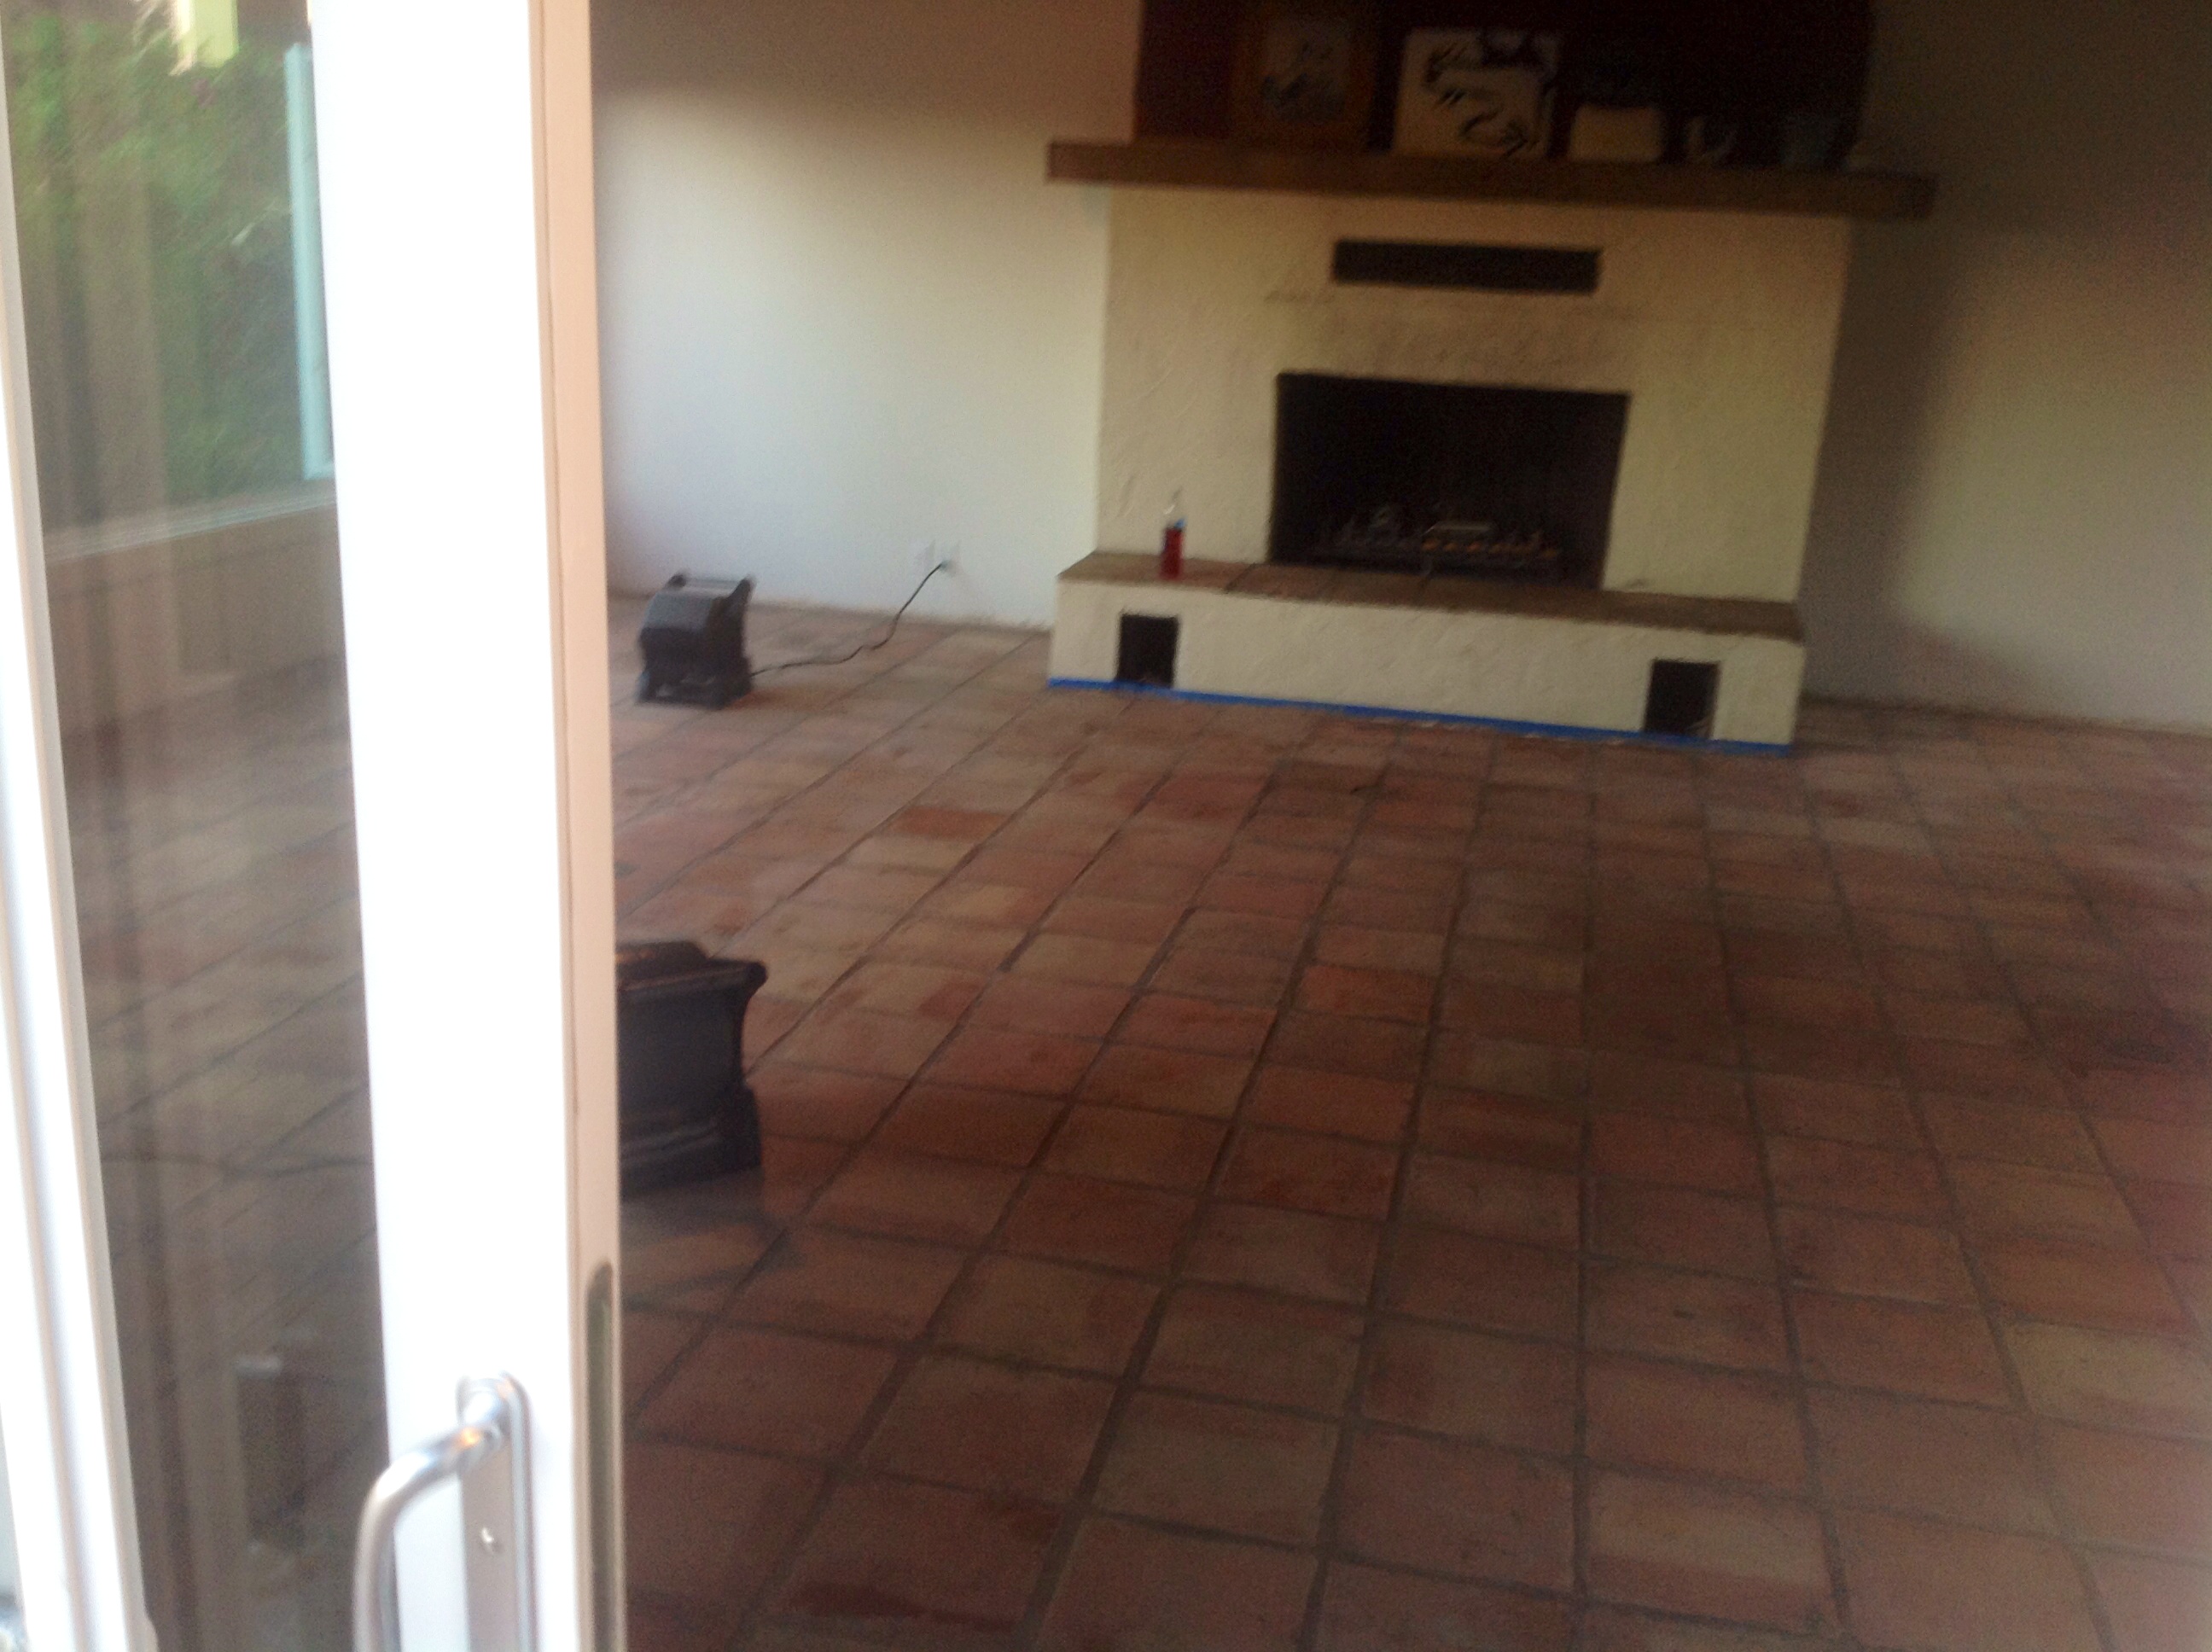 Saltillo Mexican Tiles Stripped, Cleaned, & Sealed in Redlands Ca